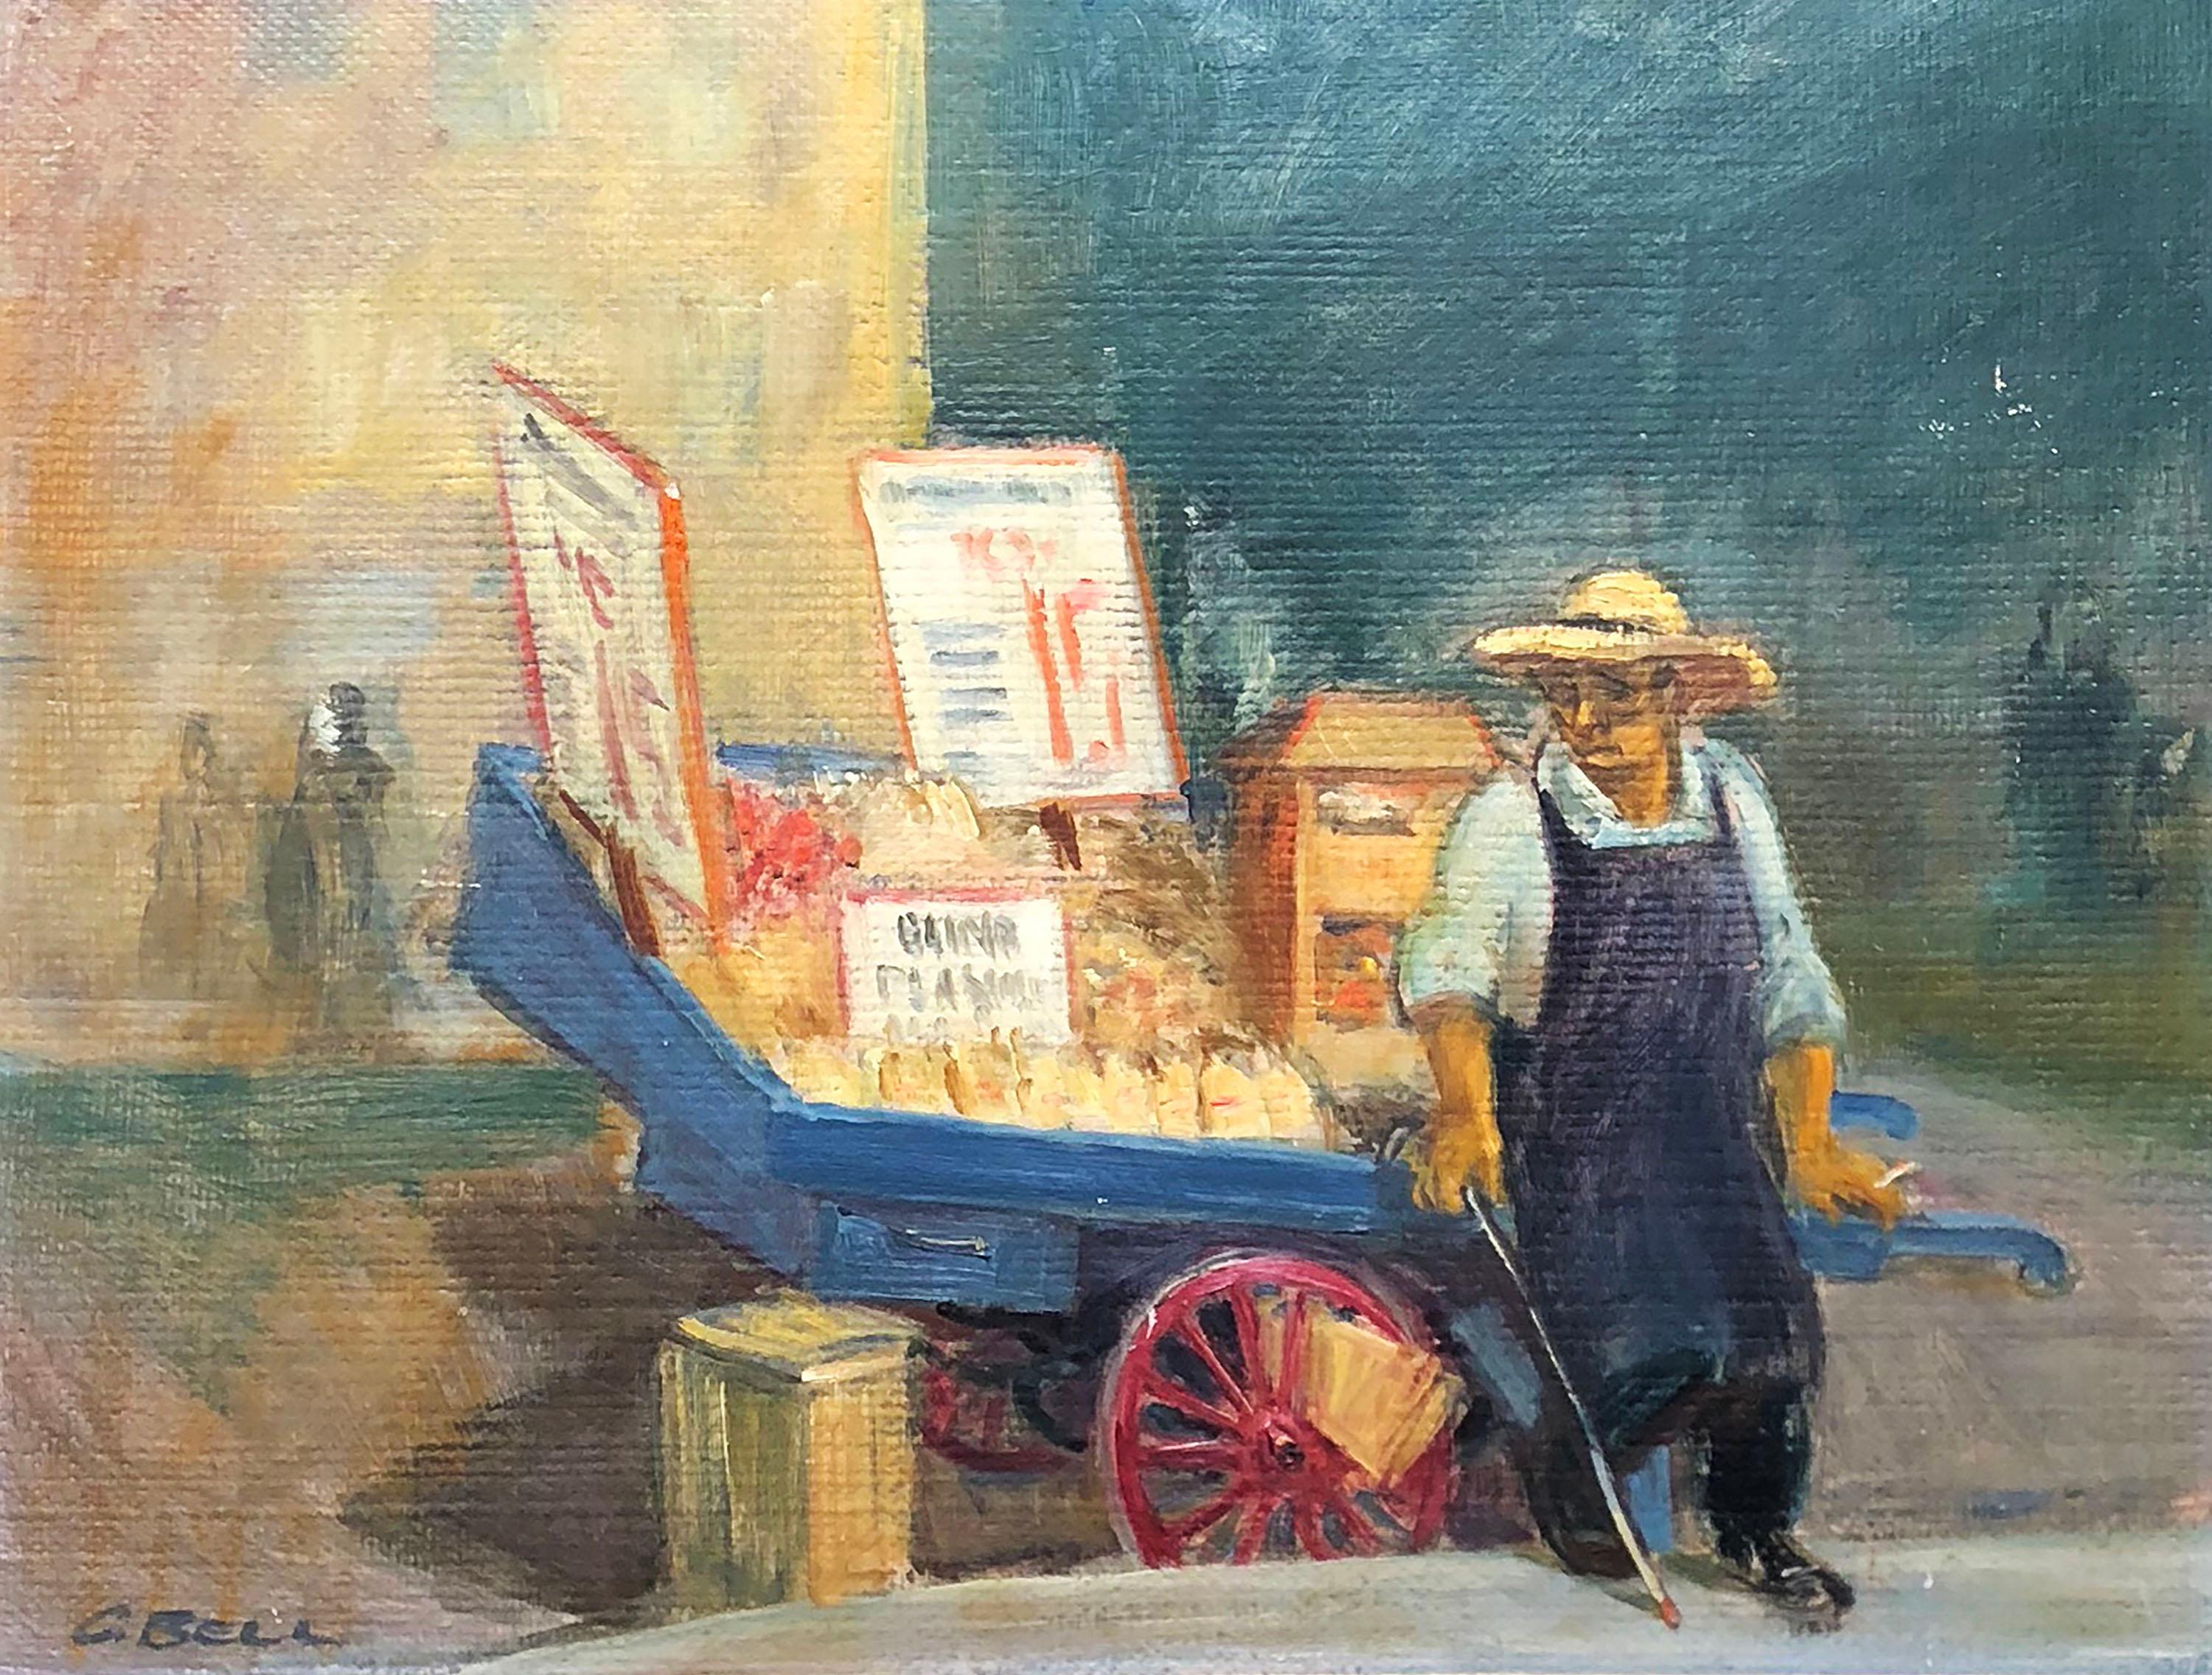 The Blind Peanut Vendor - Painting by Cecil Crosley Bell